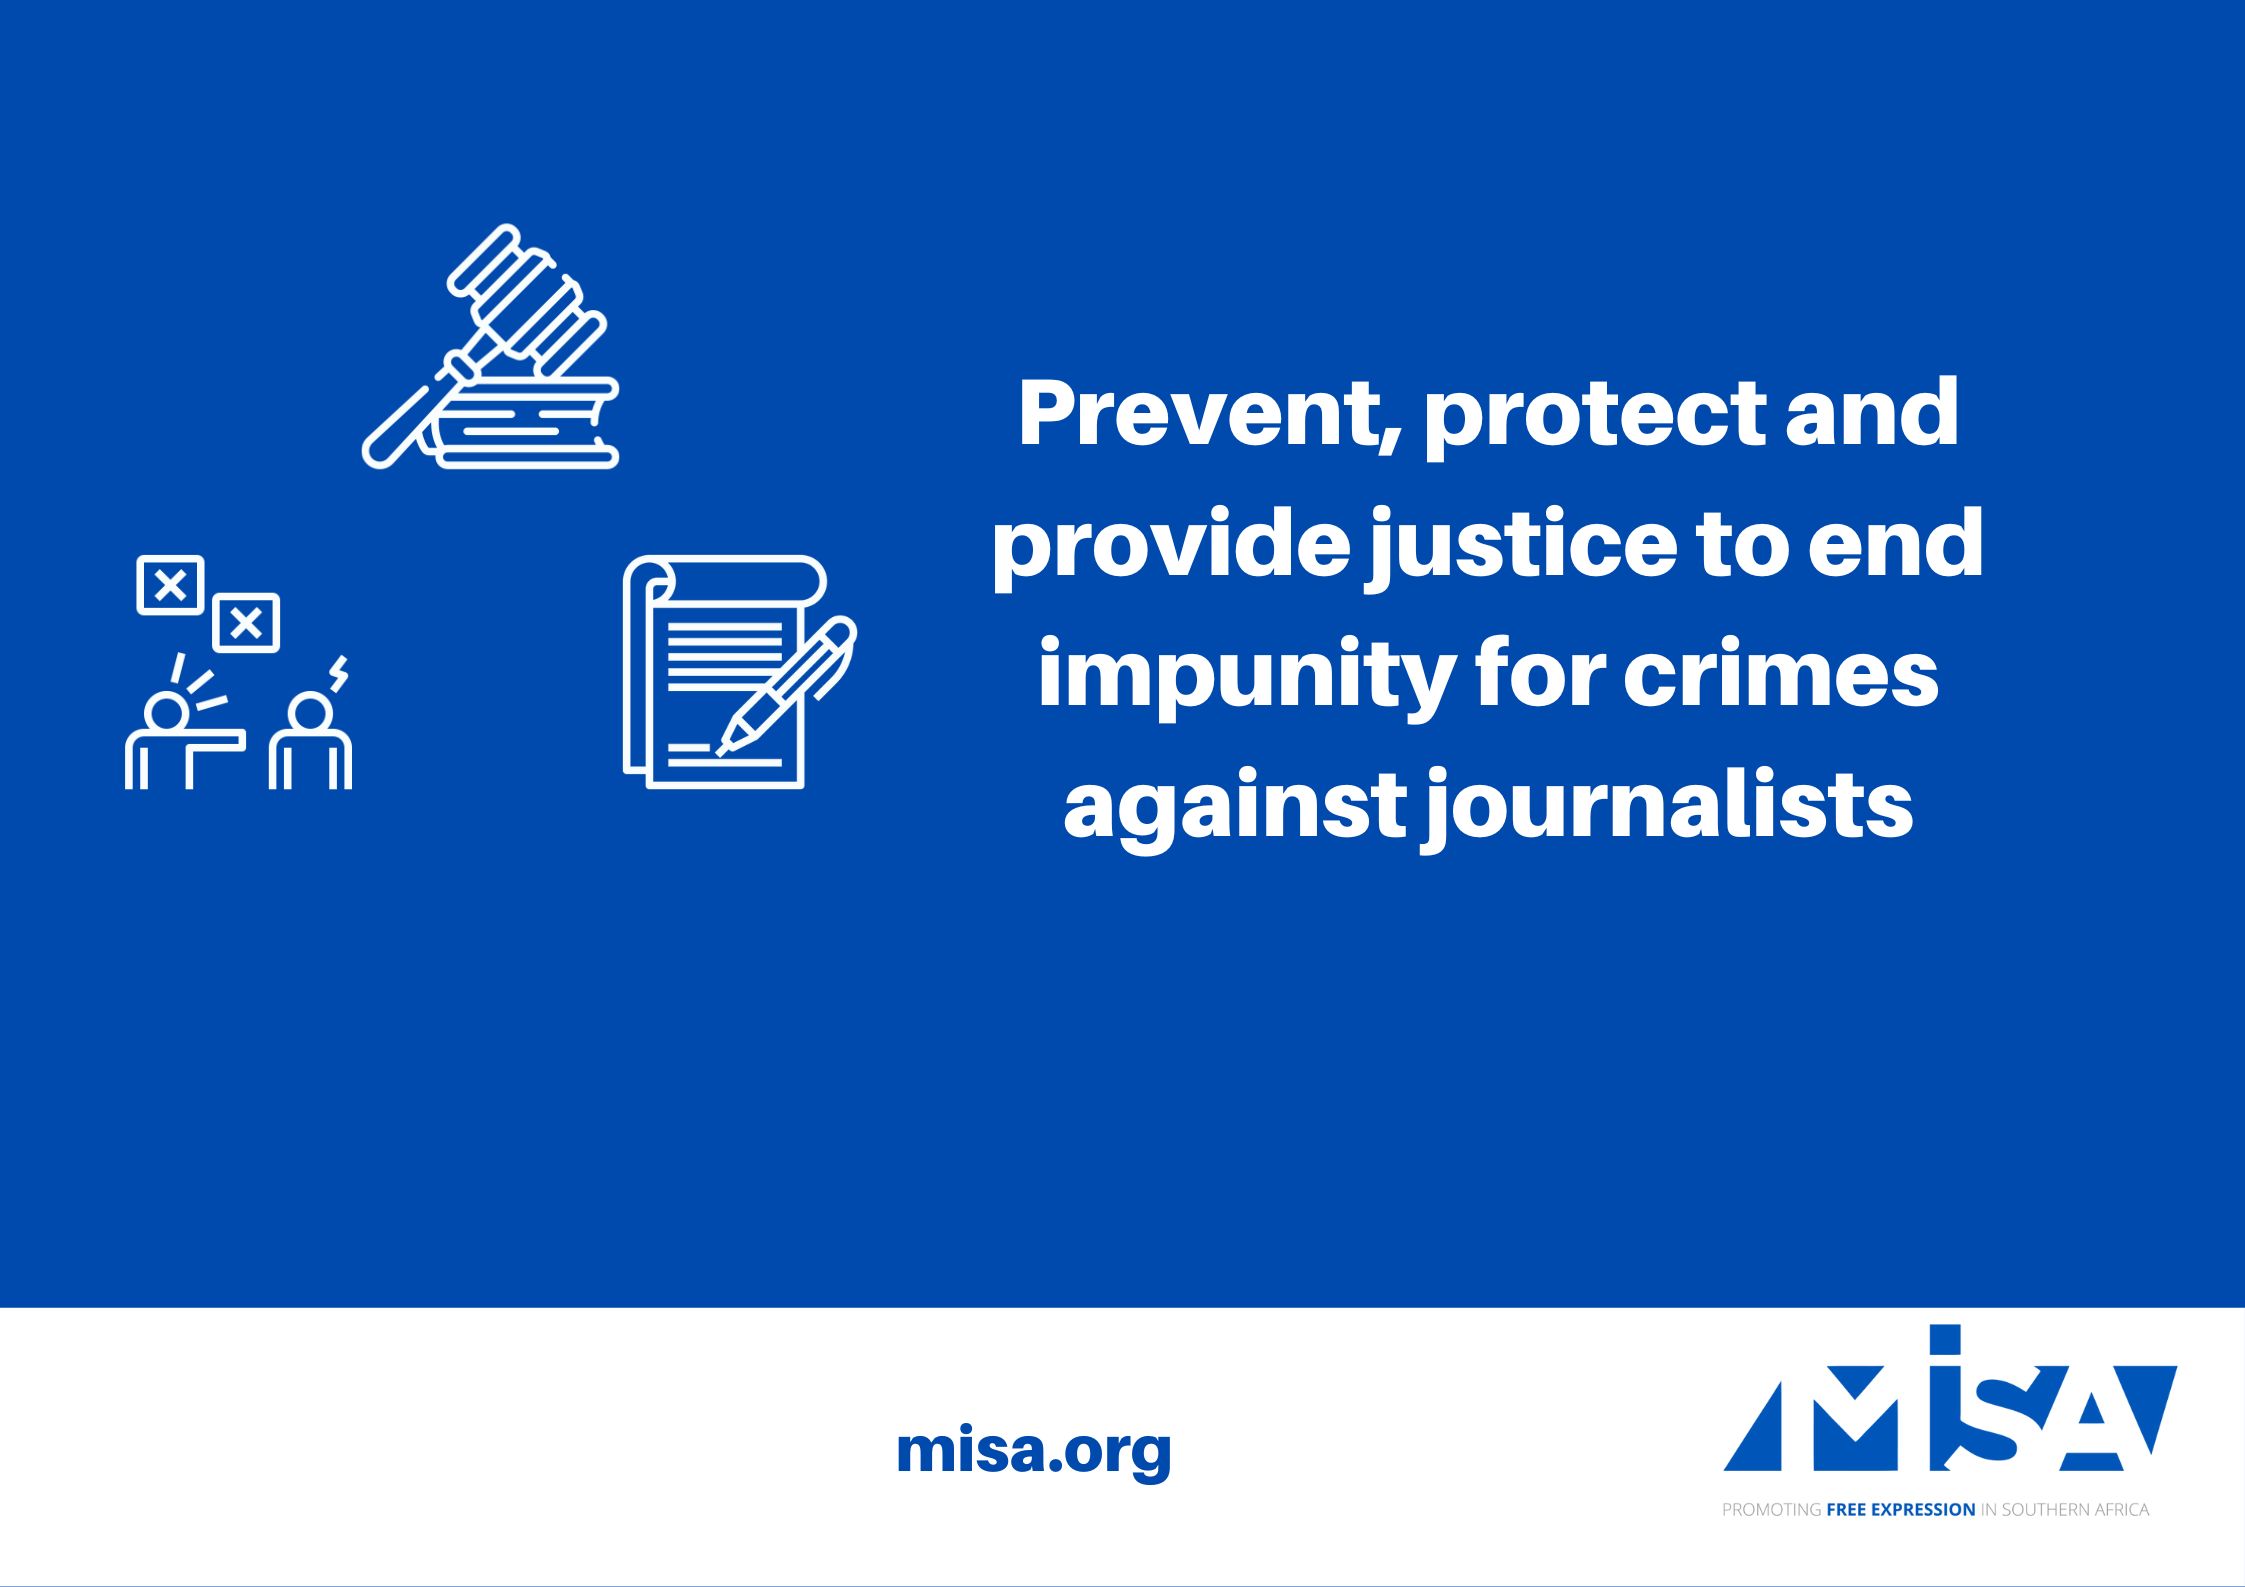 Prevent, protect and provide justice to end impunity for crimes against journalists